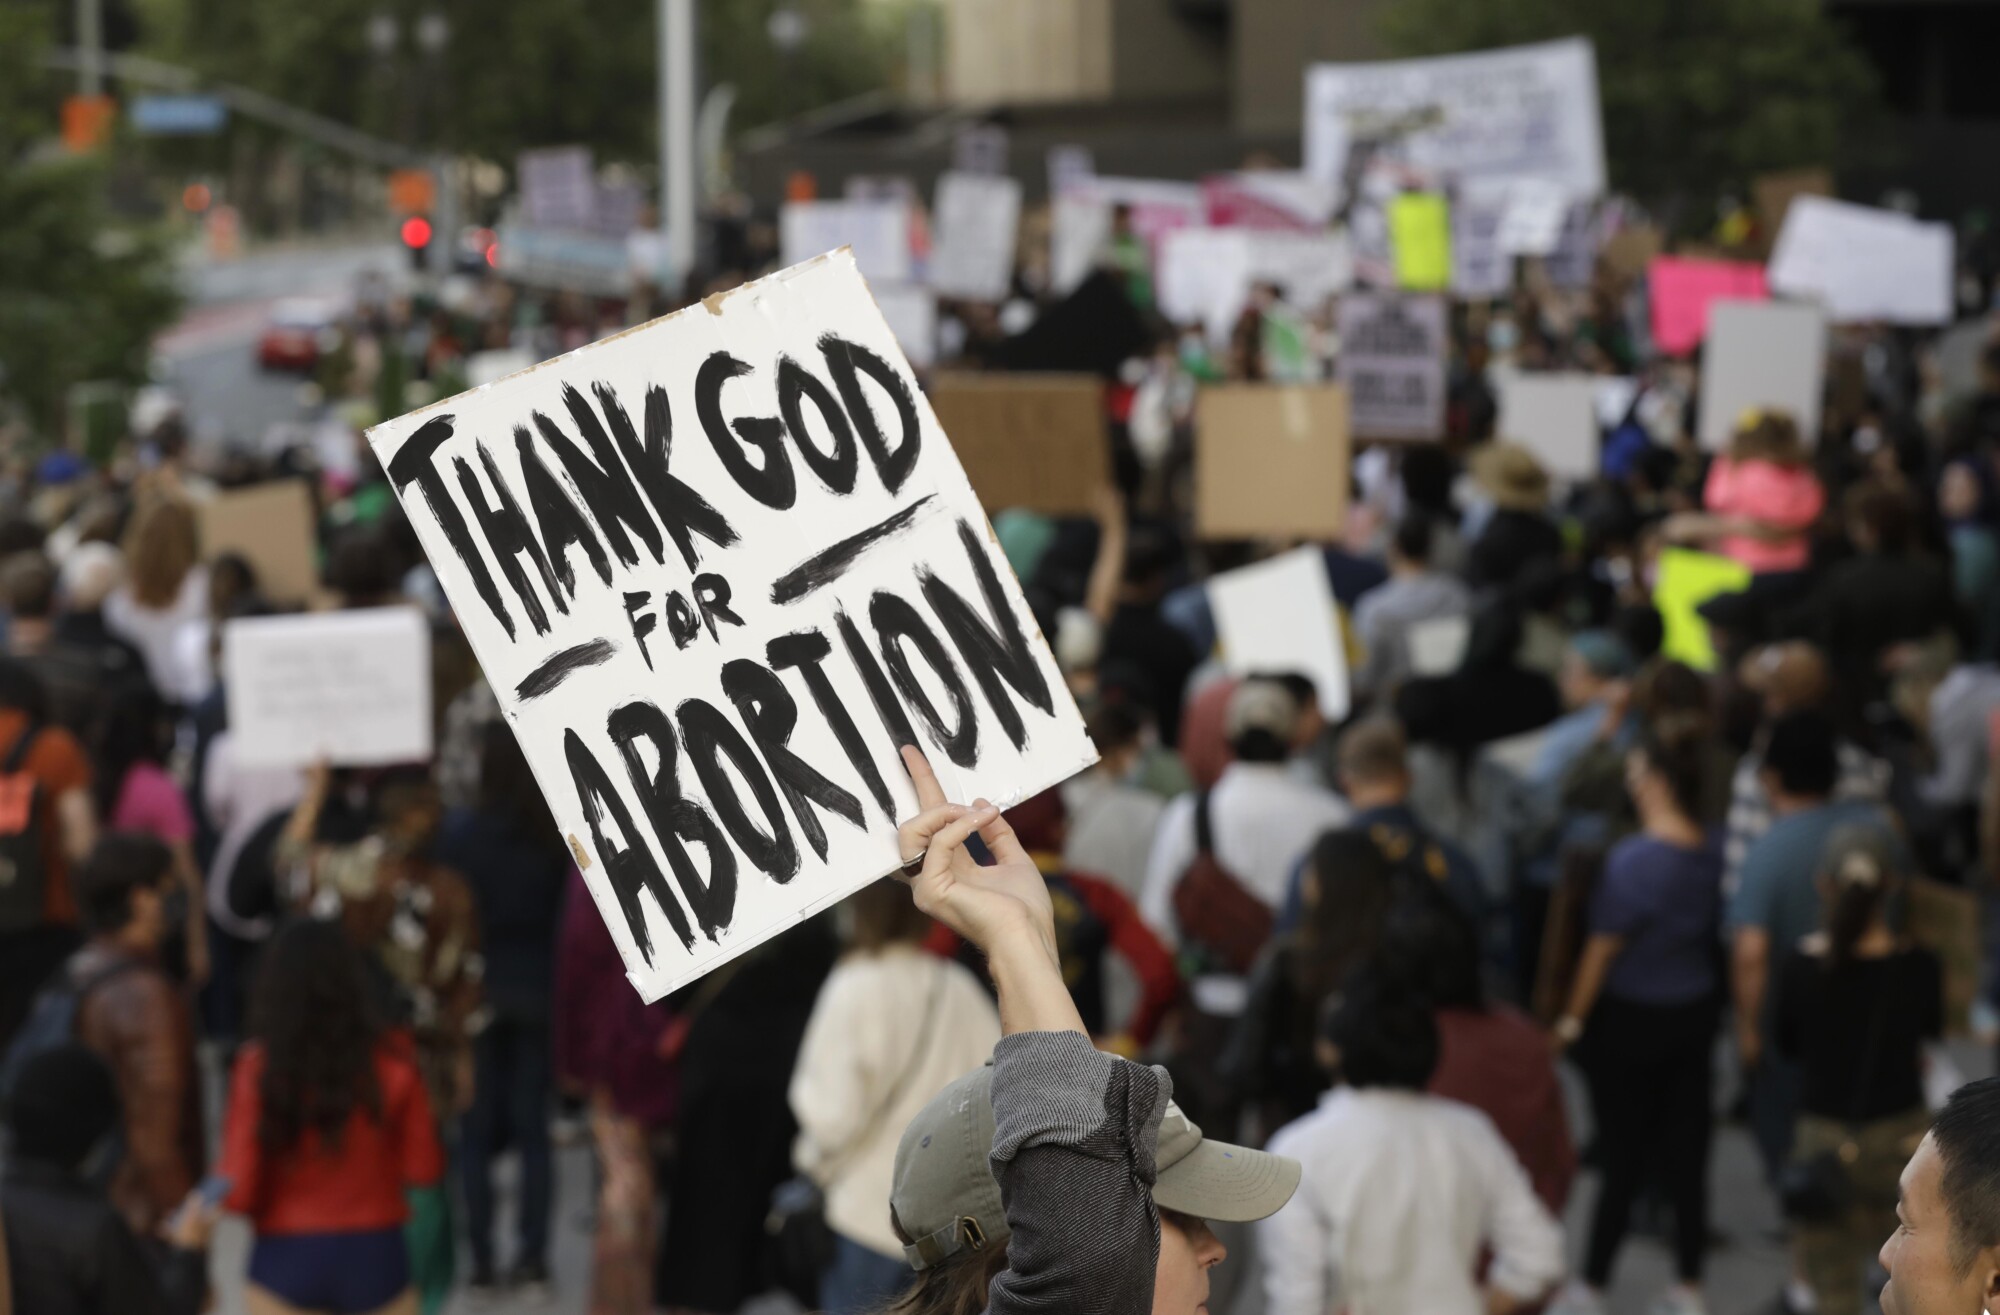 A demonstrator holds a sign that says "thank god for abortion"